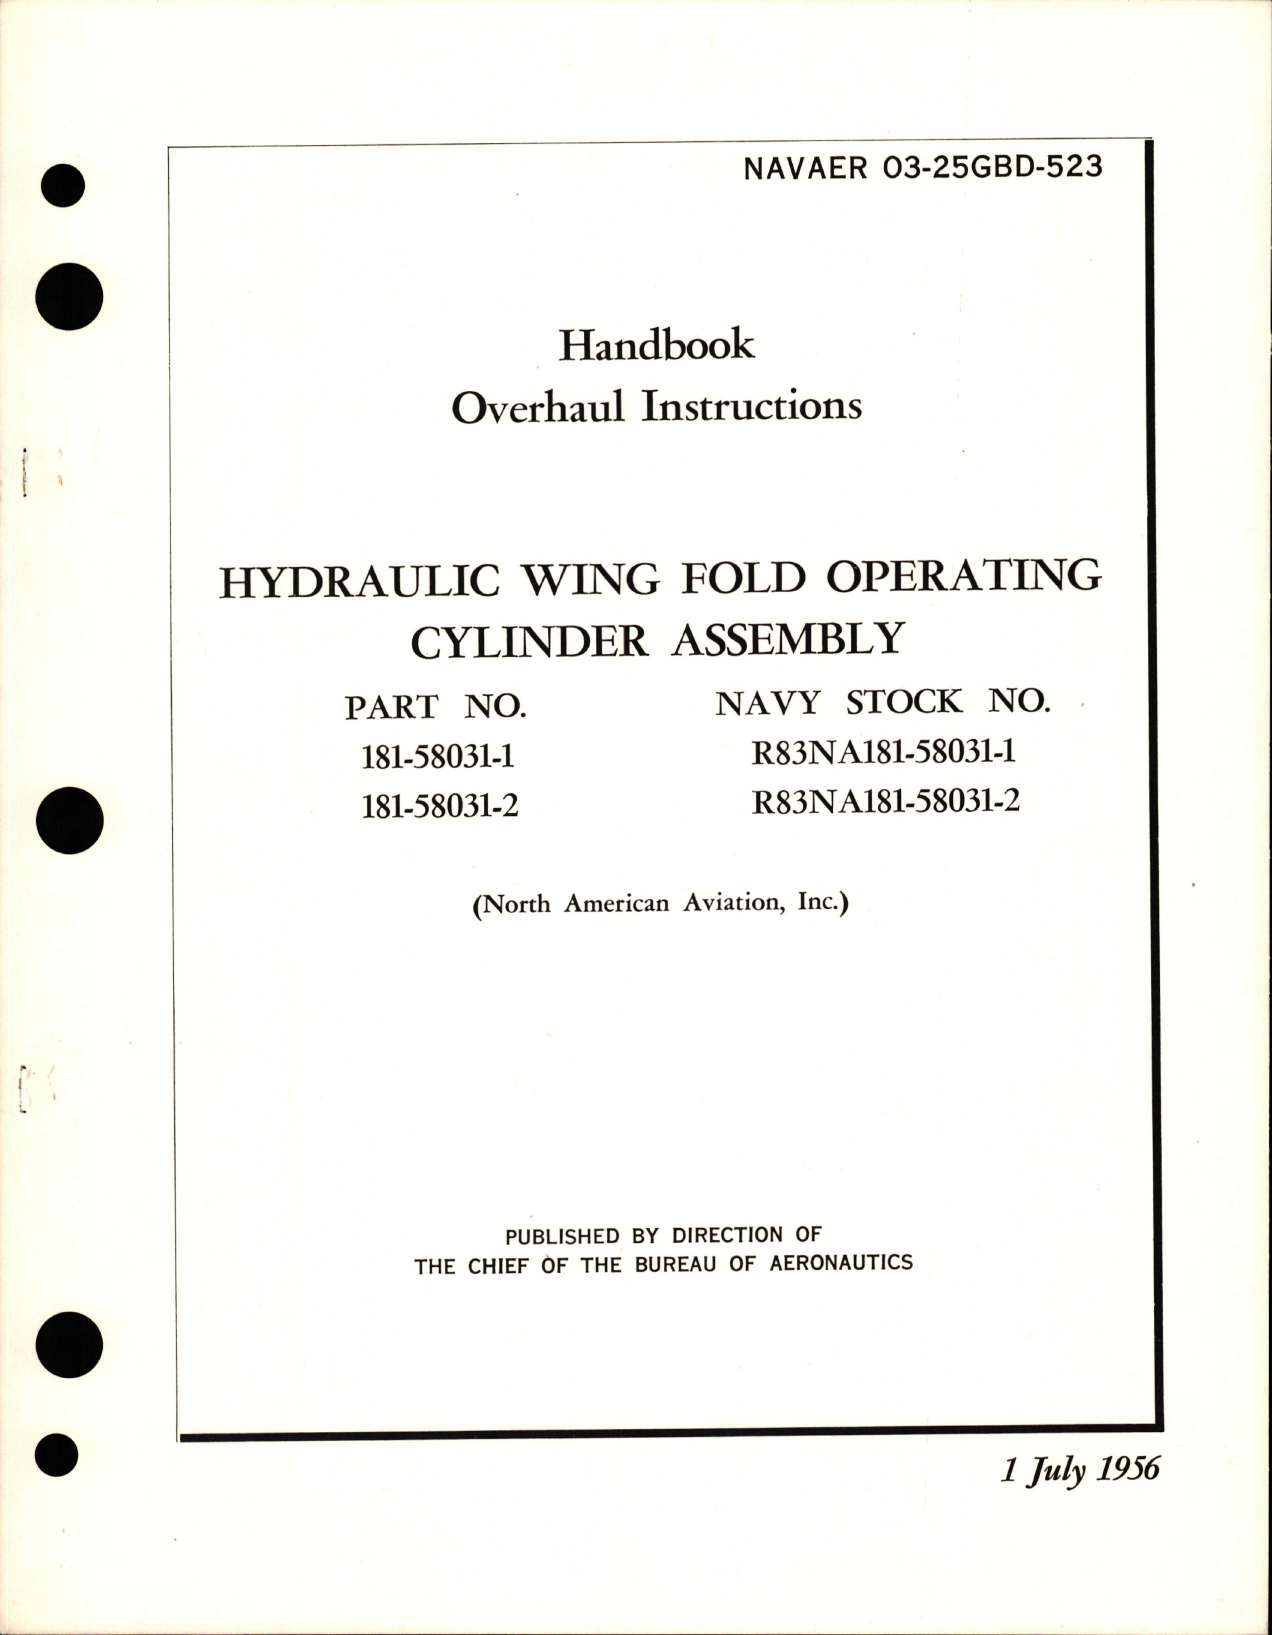 Sample page 1 from AirCorps Library document: Overhaul Instructions for Hydraulic Wing Fold Operating Cylinder Assembly - Parts 181-58031-1 and 181-58031-2 